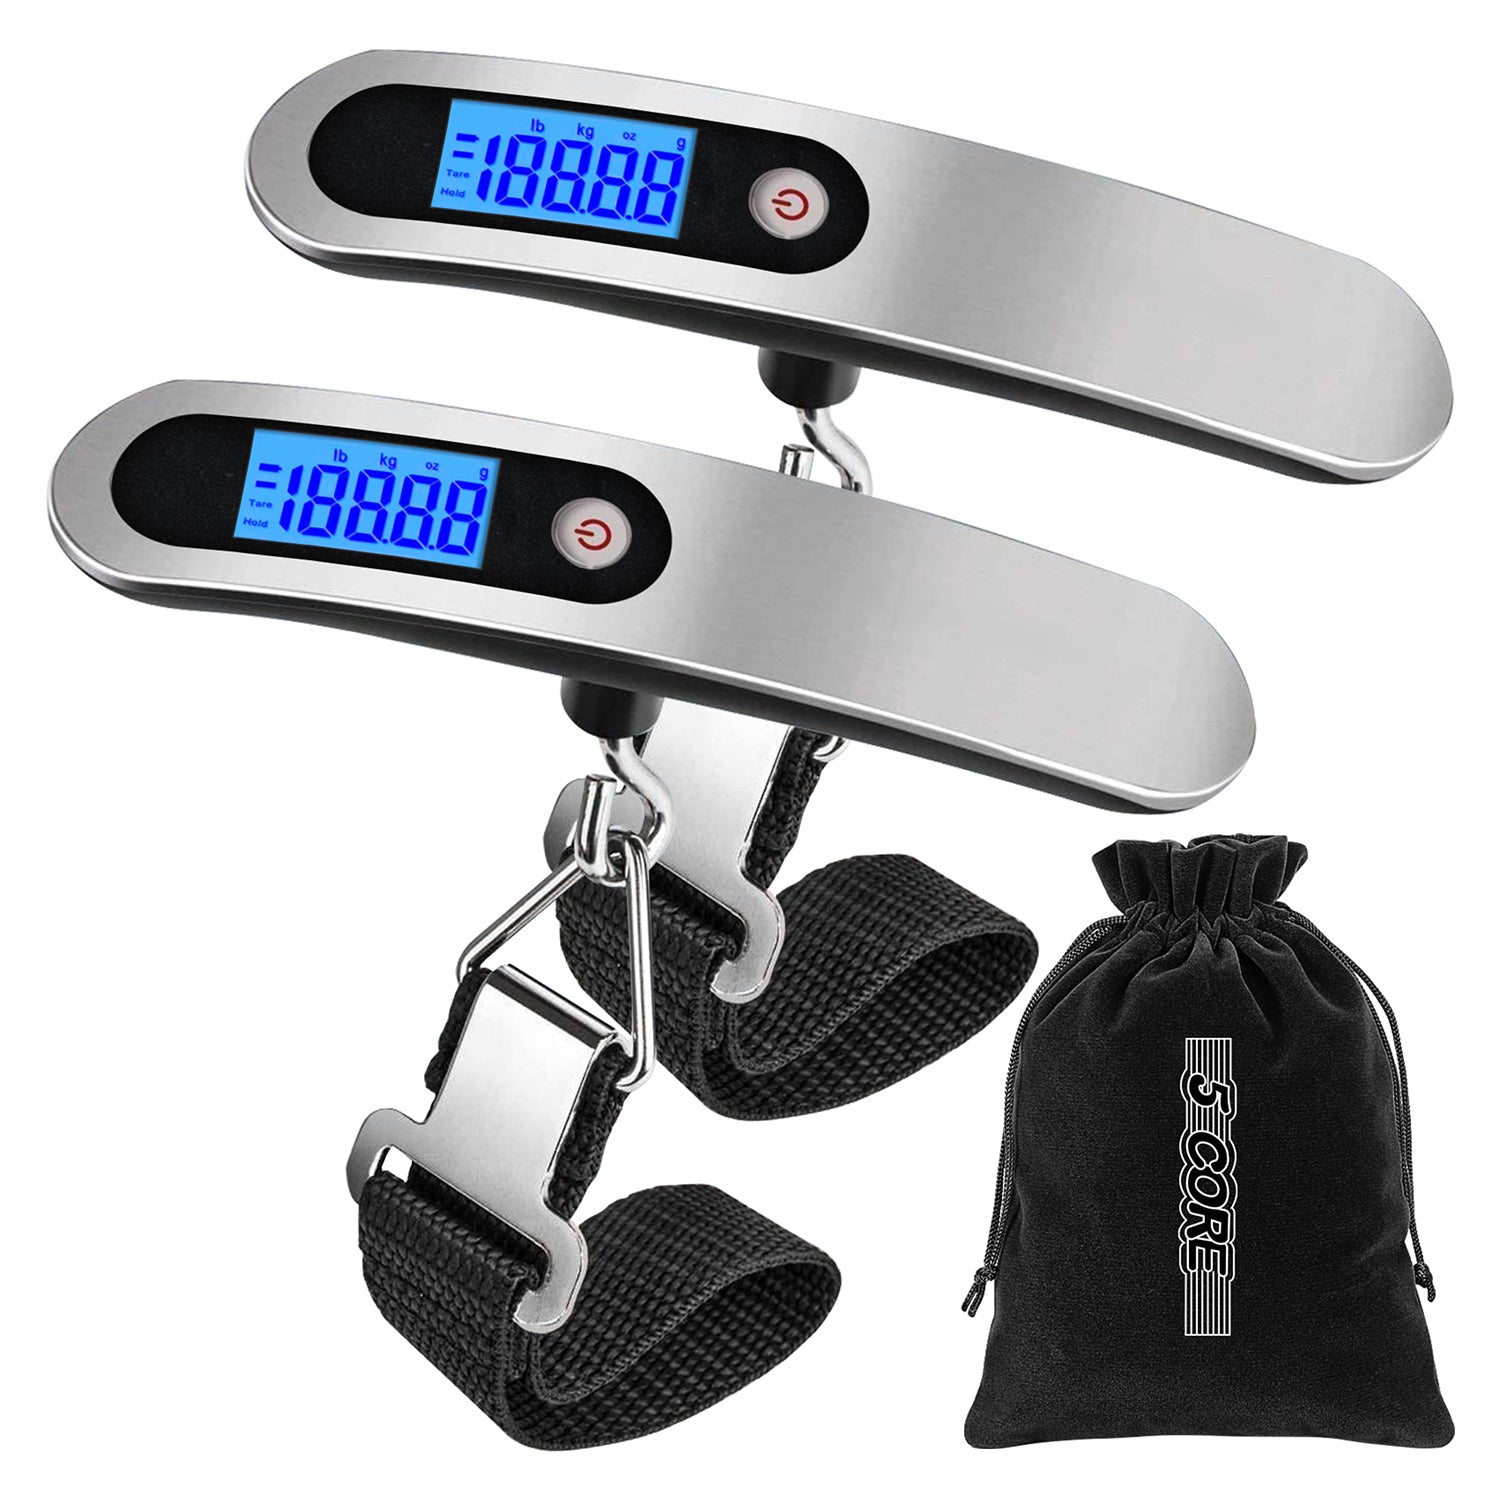 5 Core Digital Luggage Scale 110lbs Travel Weight Scale • Hanging Baggage Weighing Machine 1/2 Pc